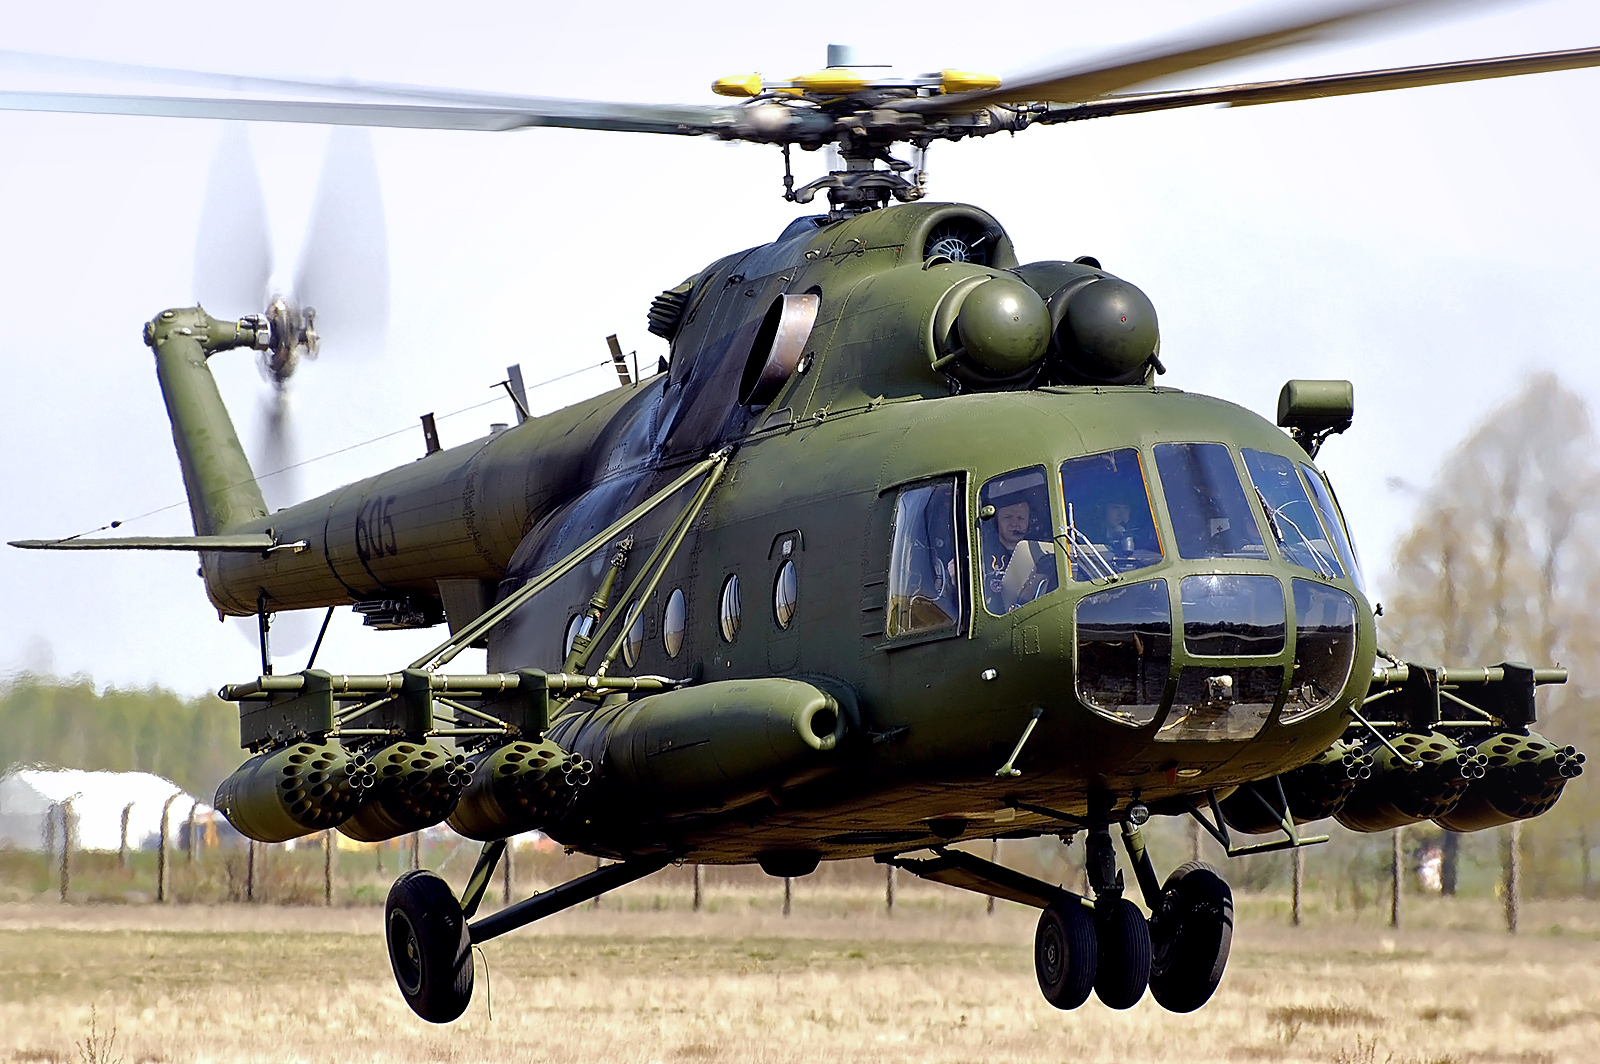 Slovakia handed over to Ukraine Mi-17 and Mi-2 helicopters, as well as ammunition for the Grad MLRS